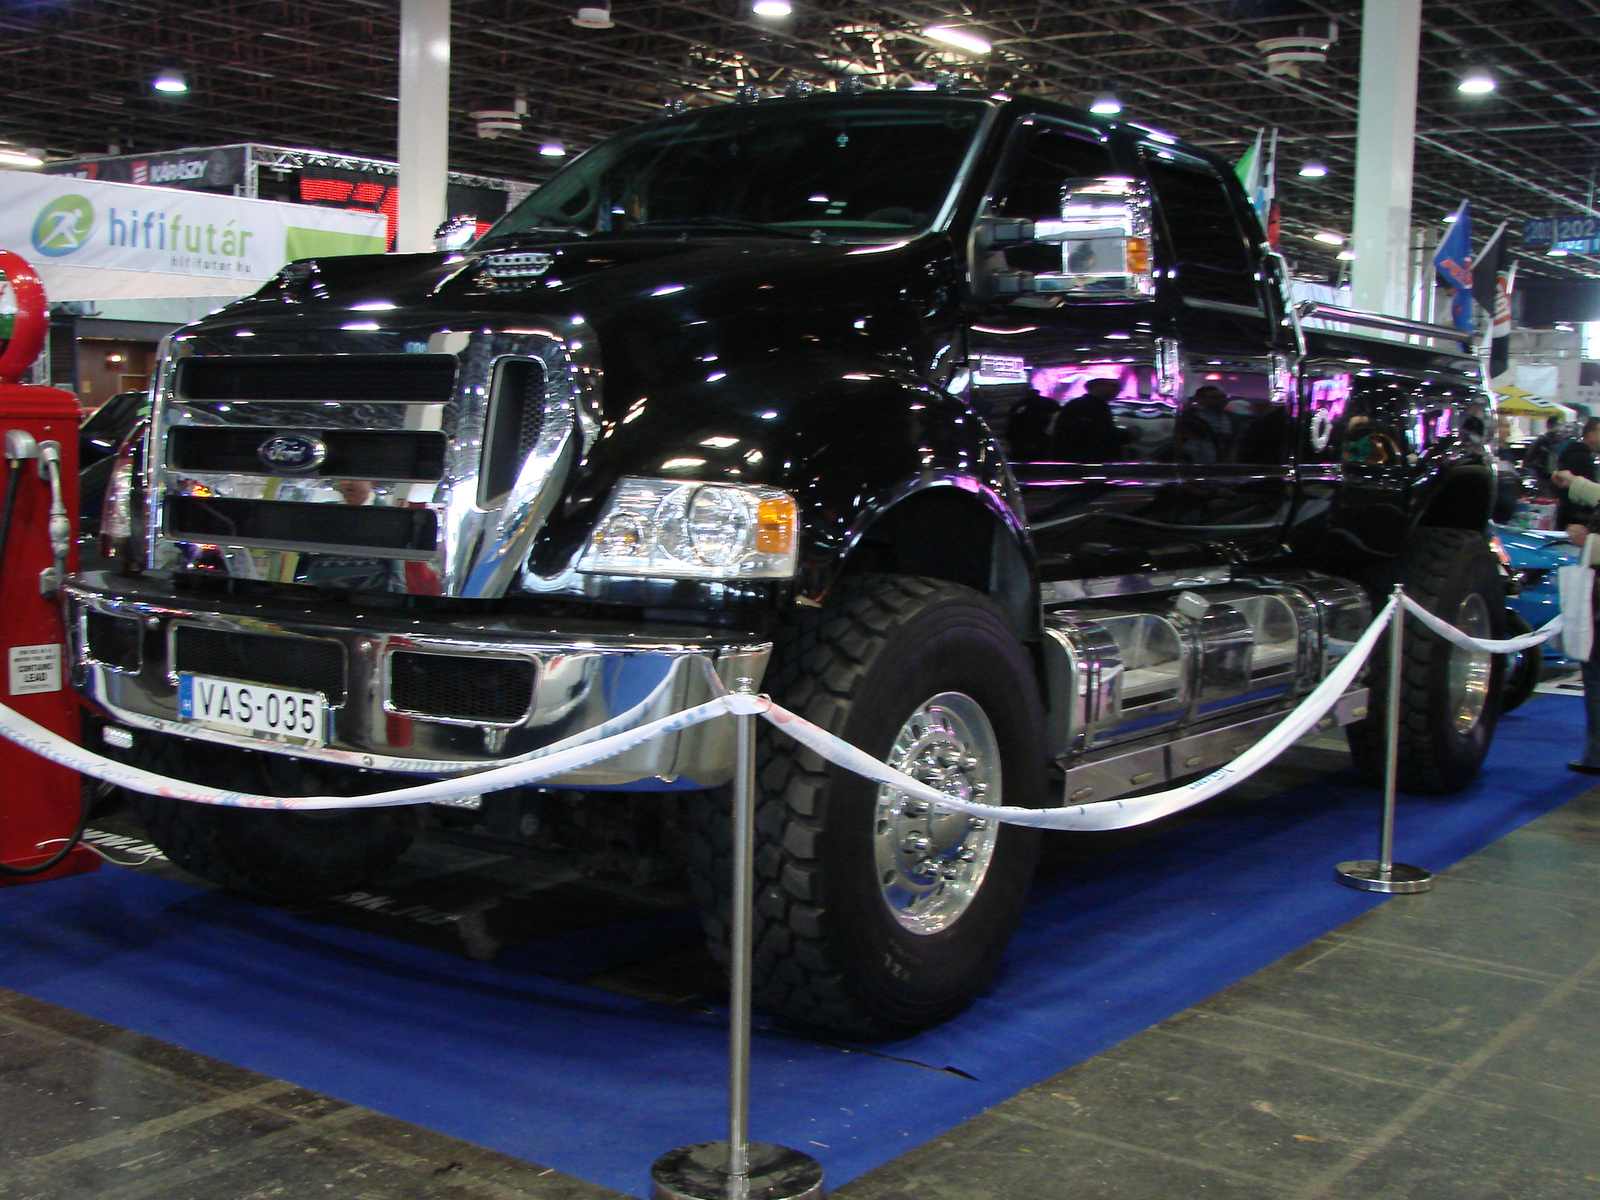 Ford F-650